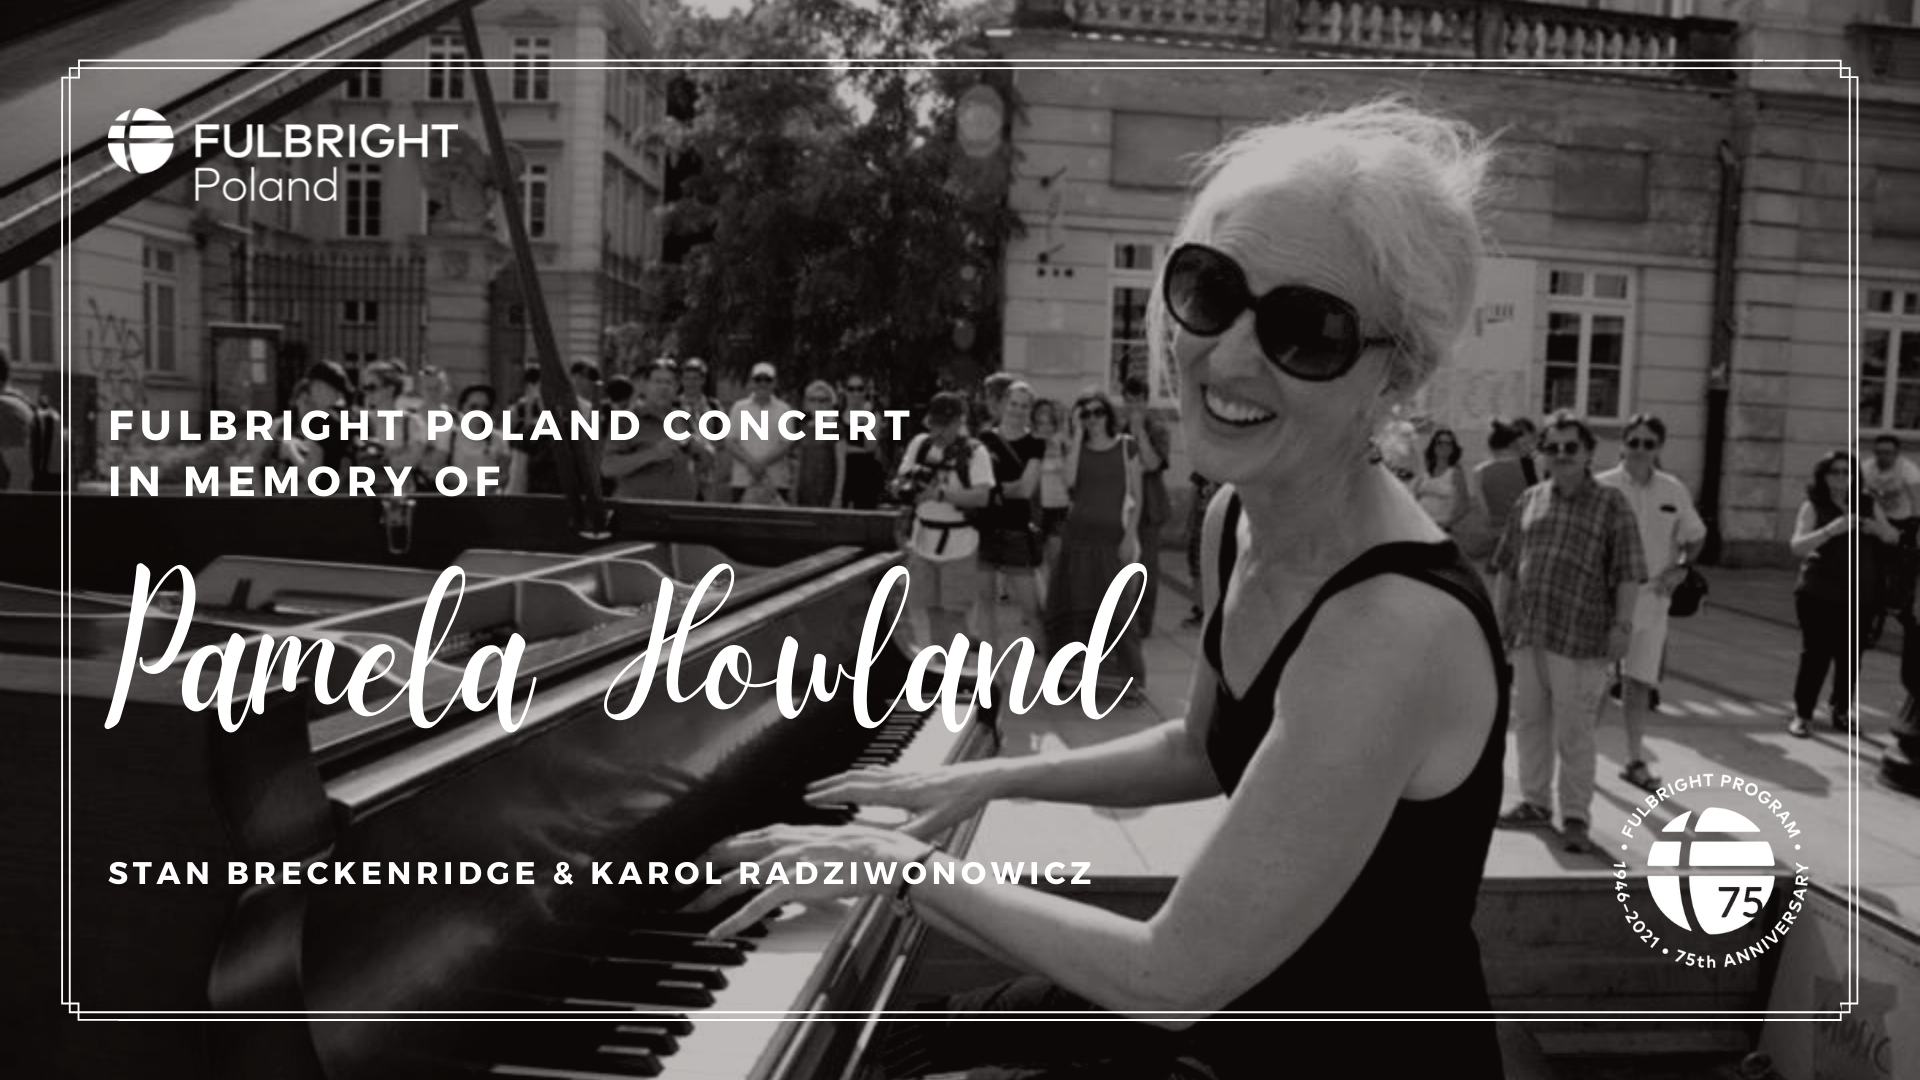 Black and white photo of person with sunglasses at piano with white text overlaid. Promotional graphic for Fulbright Day: Poland